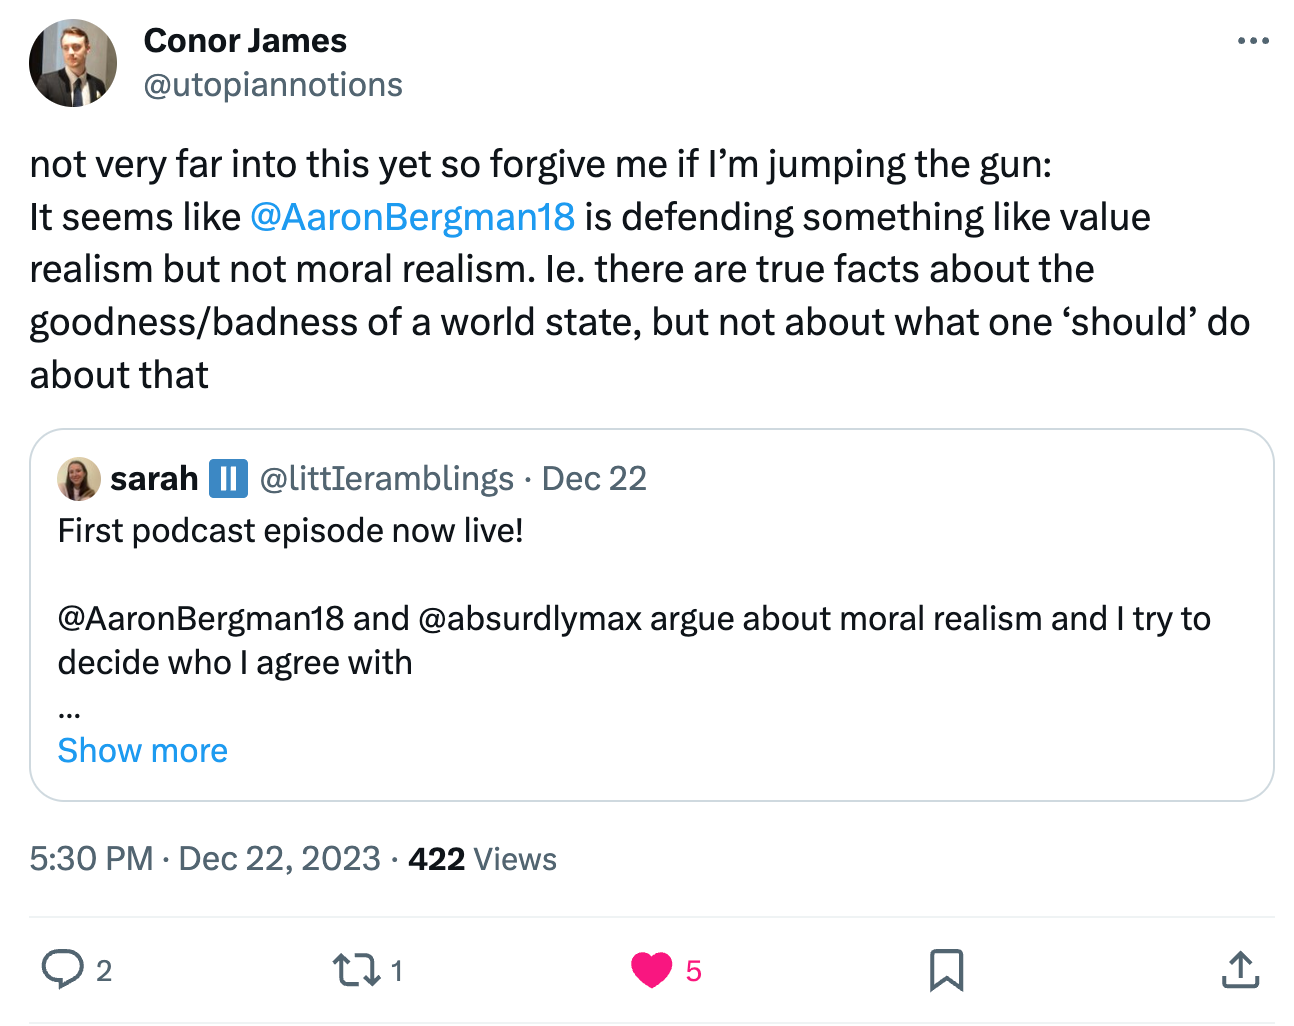 @utopiannotions not very far into this yet so forgive me if I’m jumping the gun: It seems like  @AaronBergman18  is defending something like value realism but not moral realism. Ie. there are true facts about the goodness/badness of a world state, but not about what one ‘should’ do about that